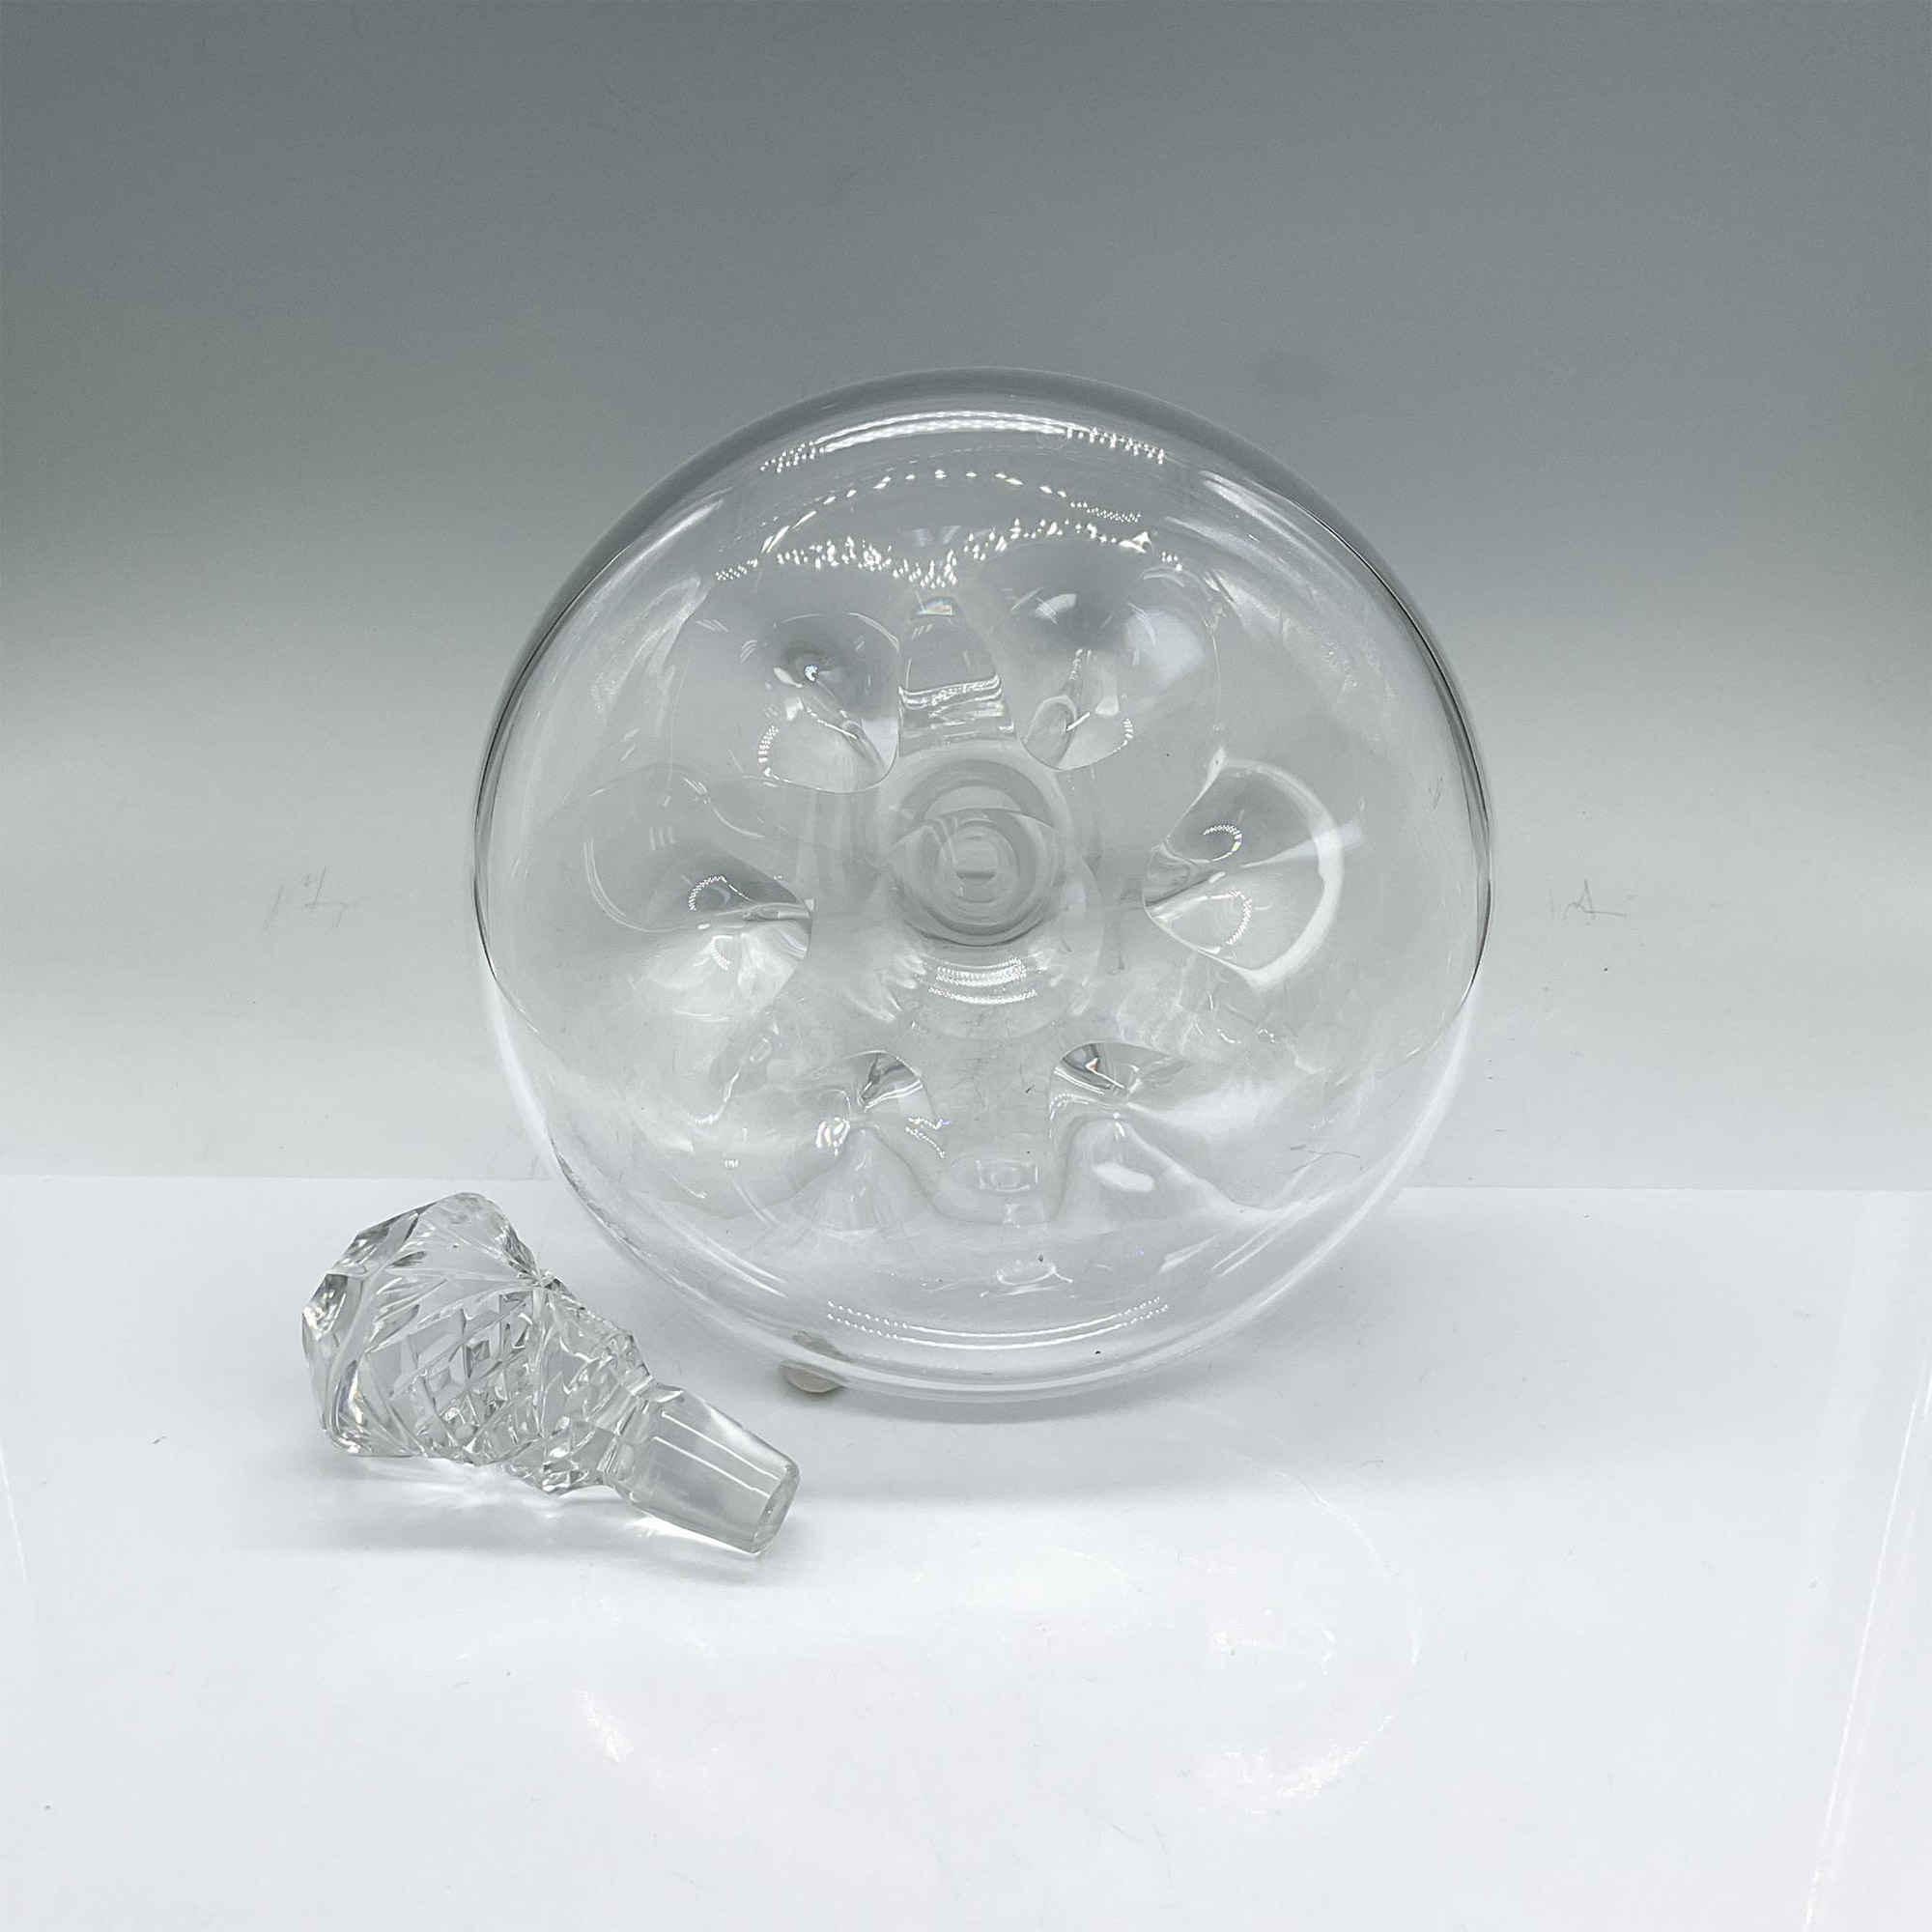 Orrefors Crystal Decanter with Stopper - Image 3 of 3